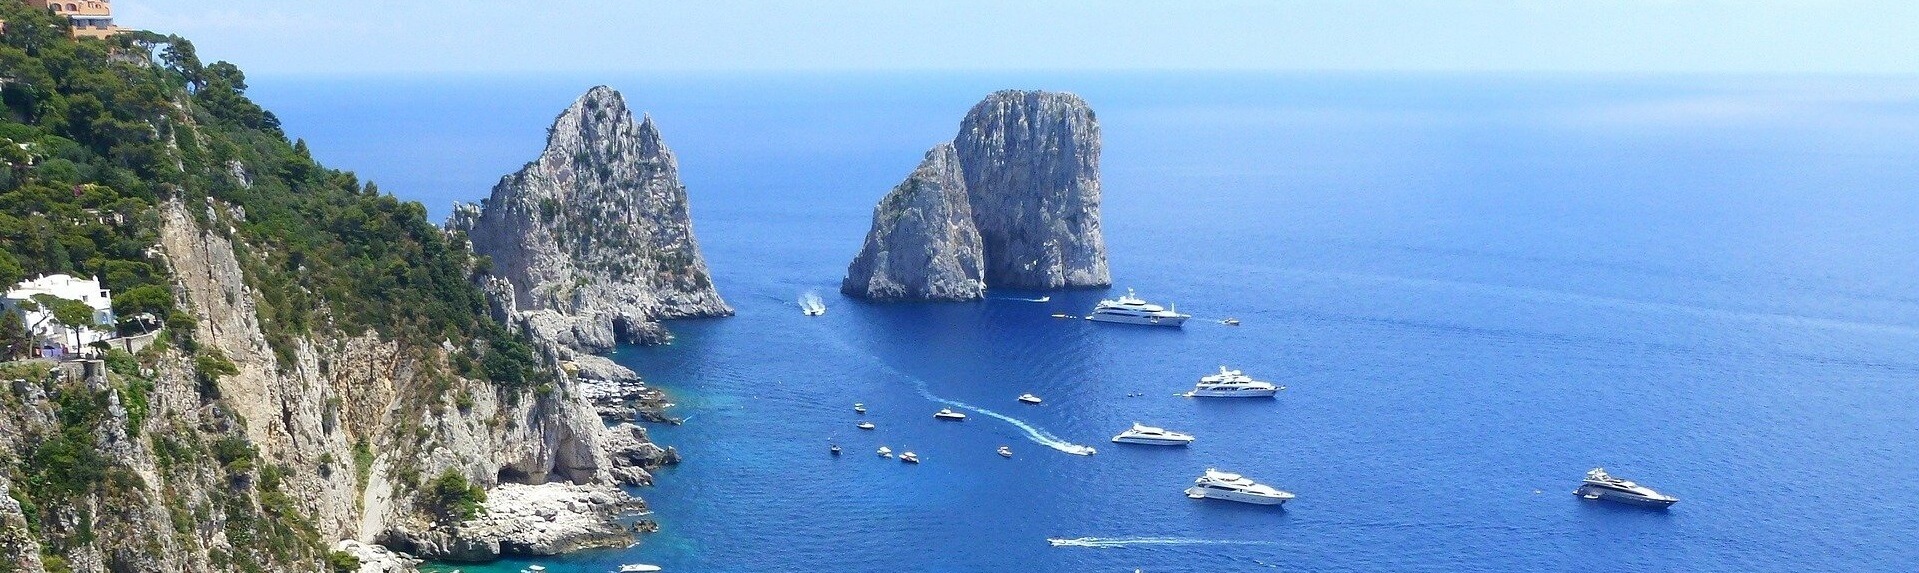 What are the differences between Capri and Anacapri?